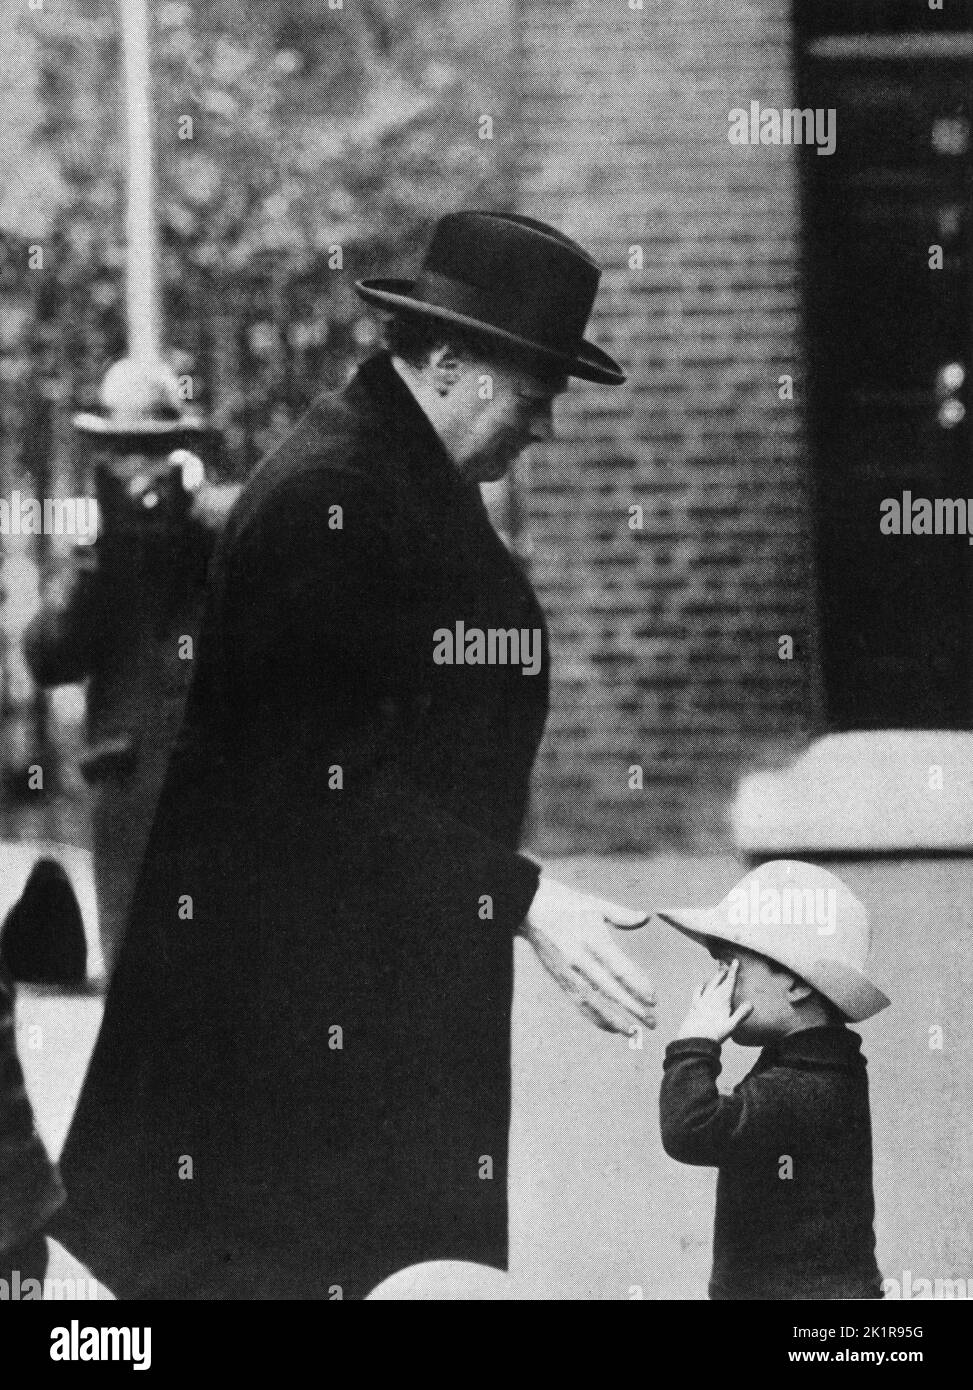 Winston Churchill greets a small child on his way to attend a Cabinet meeting at the time of the General Strike. 1926. Stock Photo